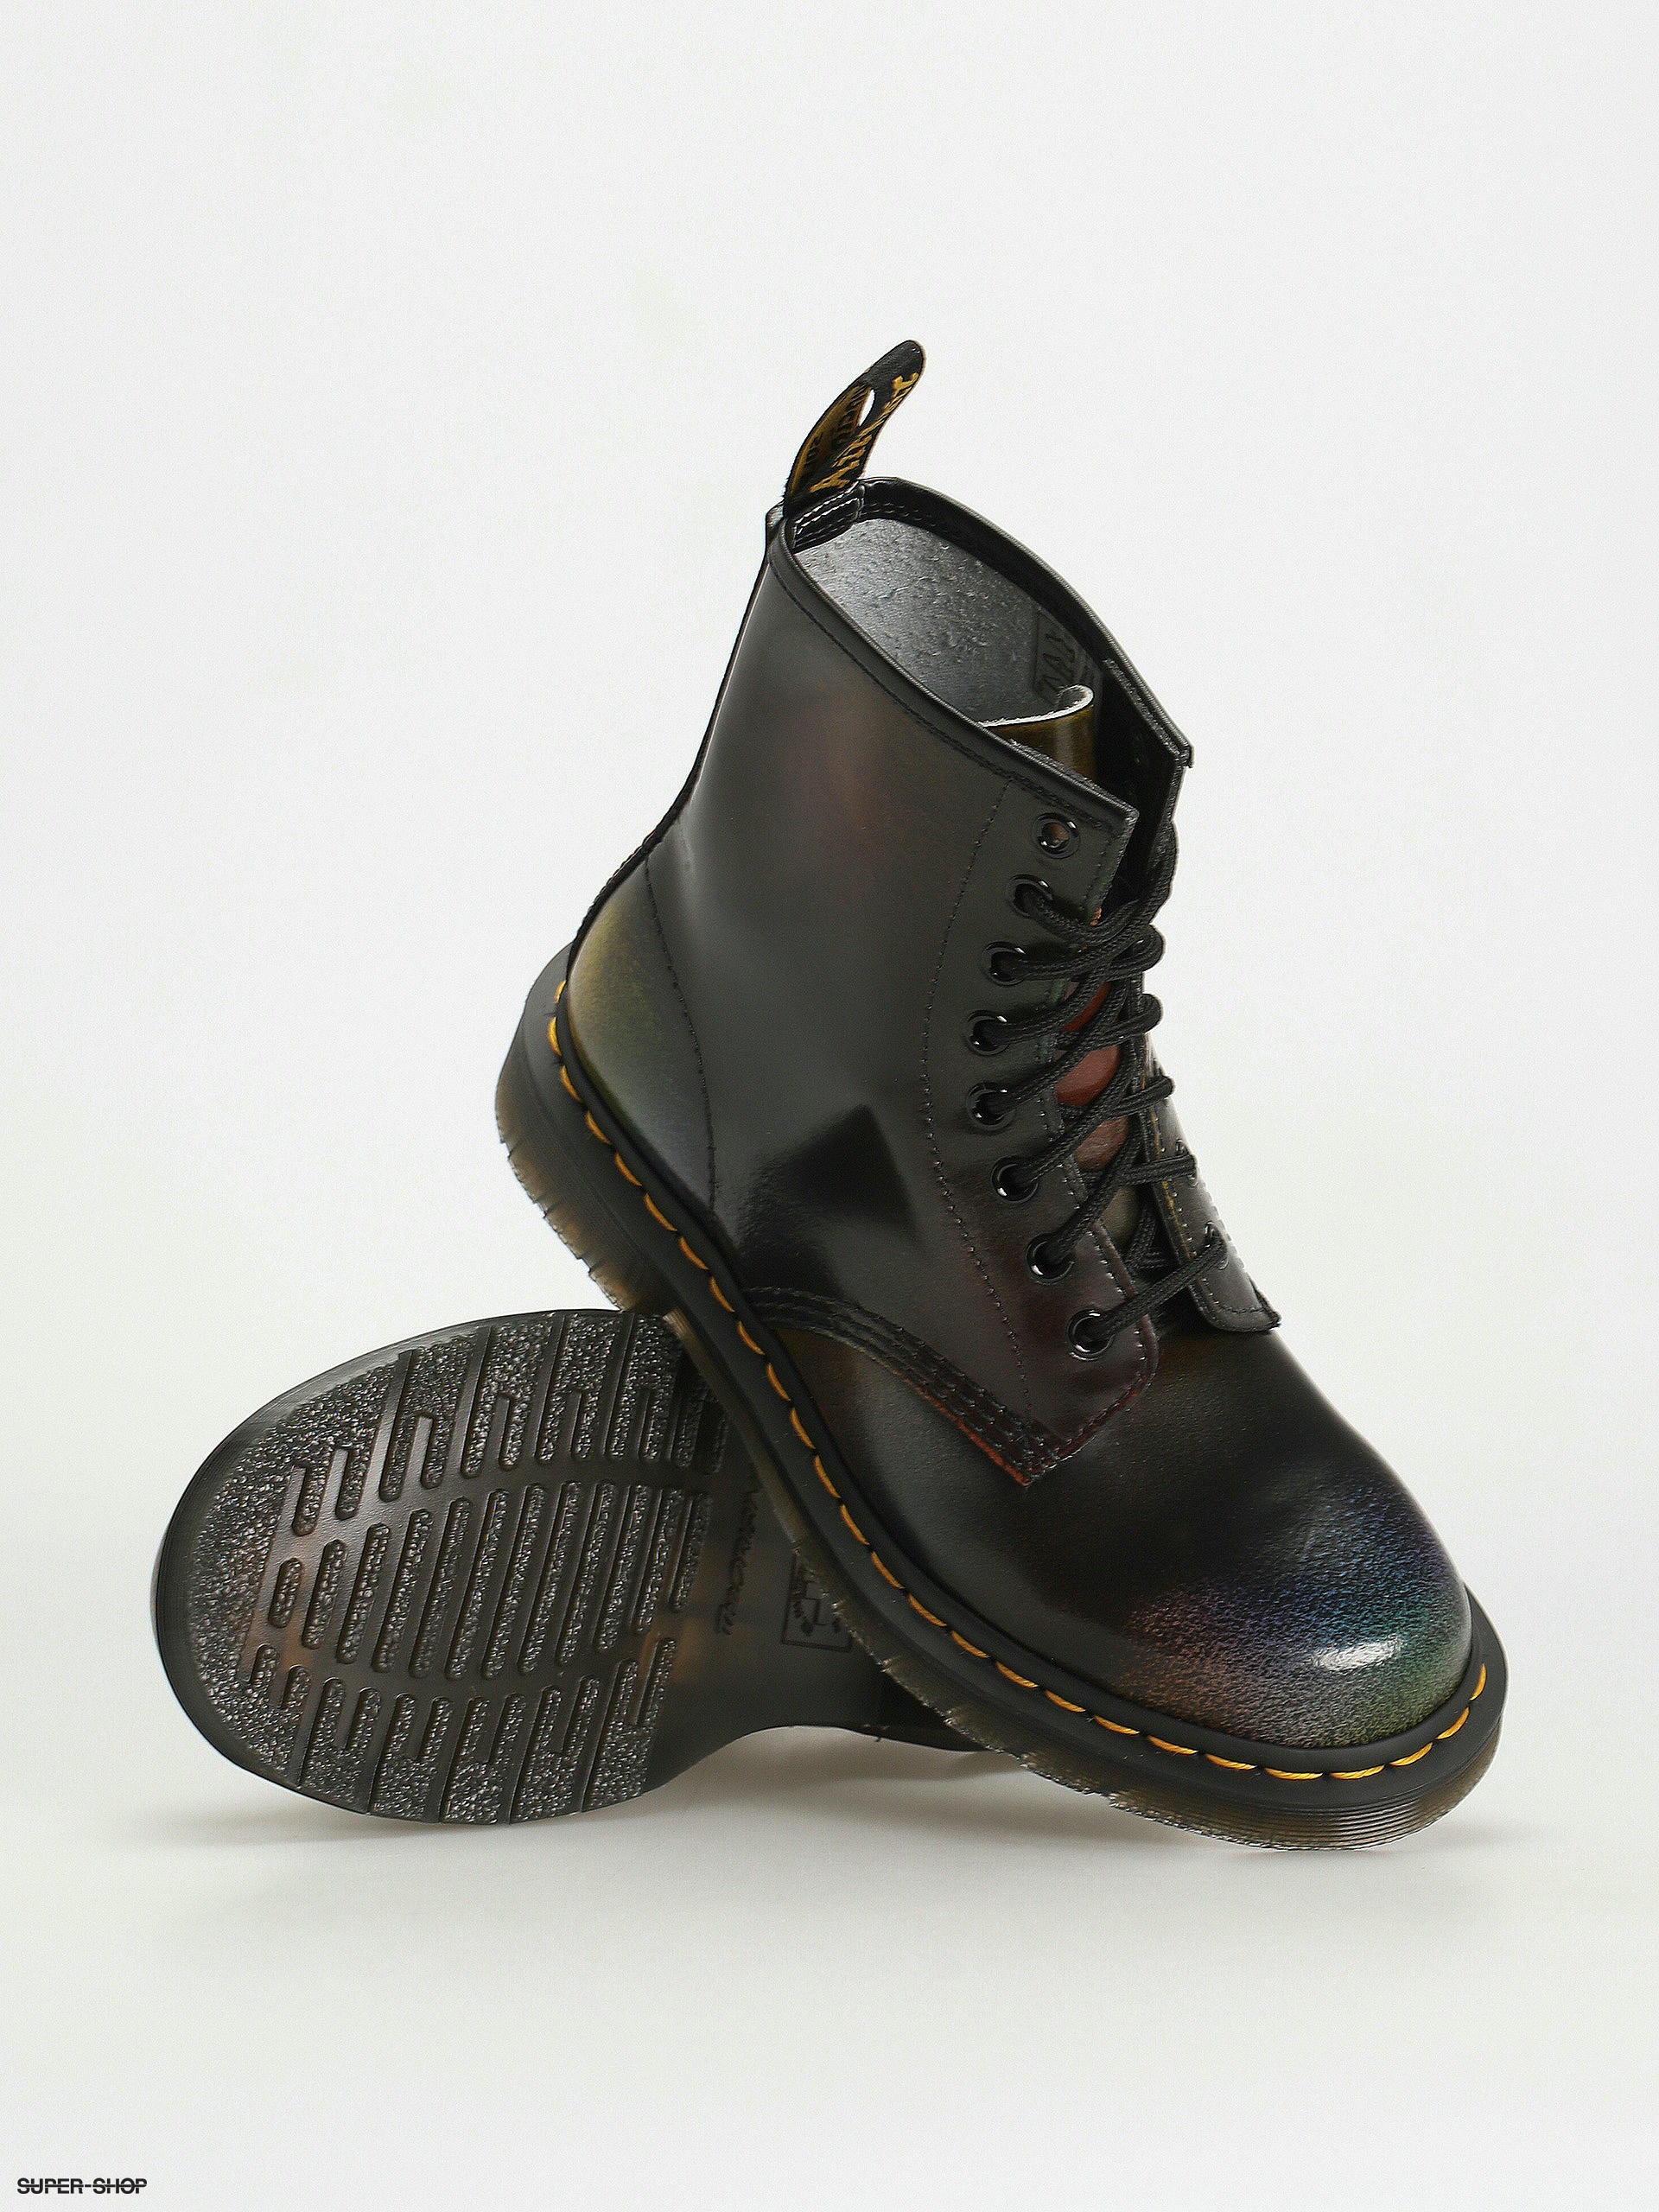 An Ode to Dr. Martens, the Combat Boots That Stole My Heart at 13 | Vogue